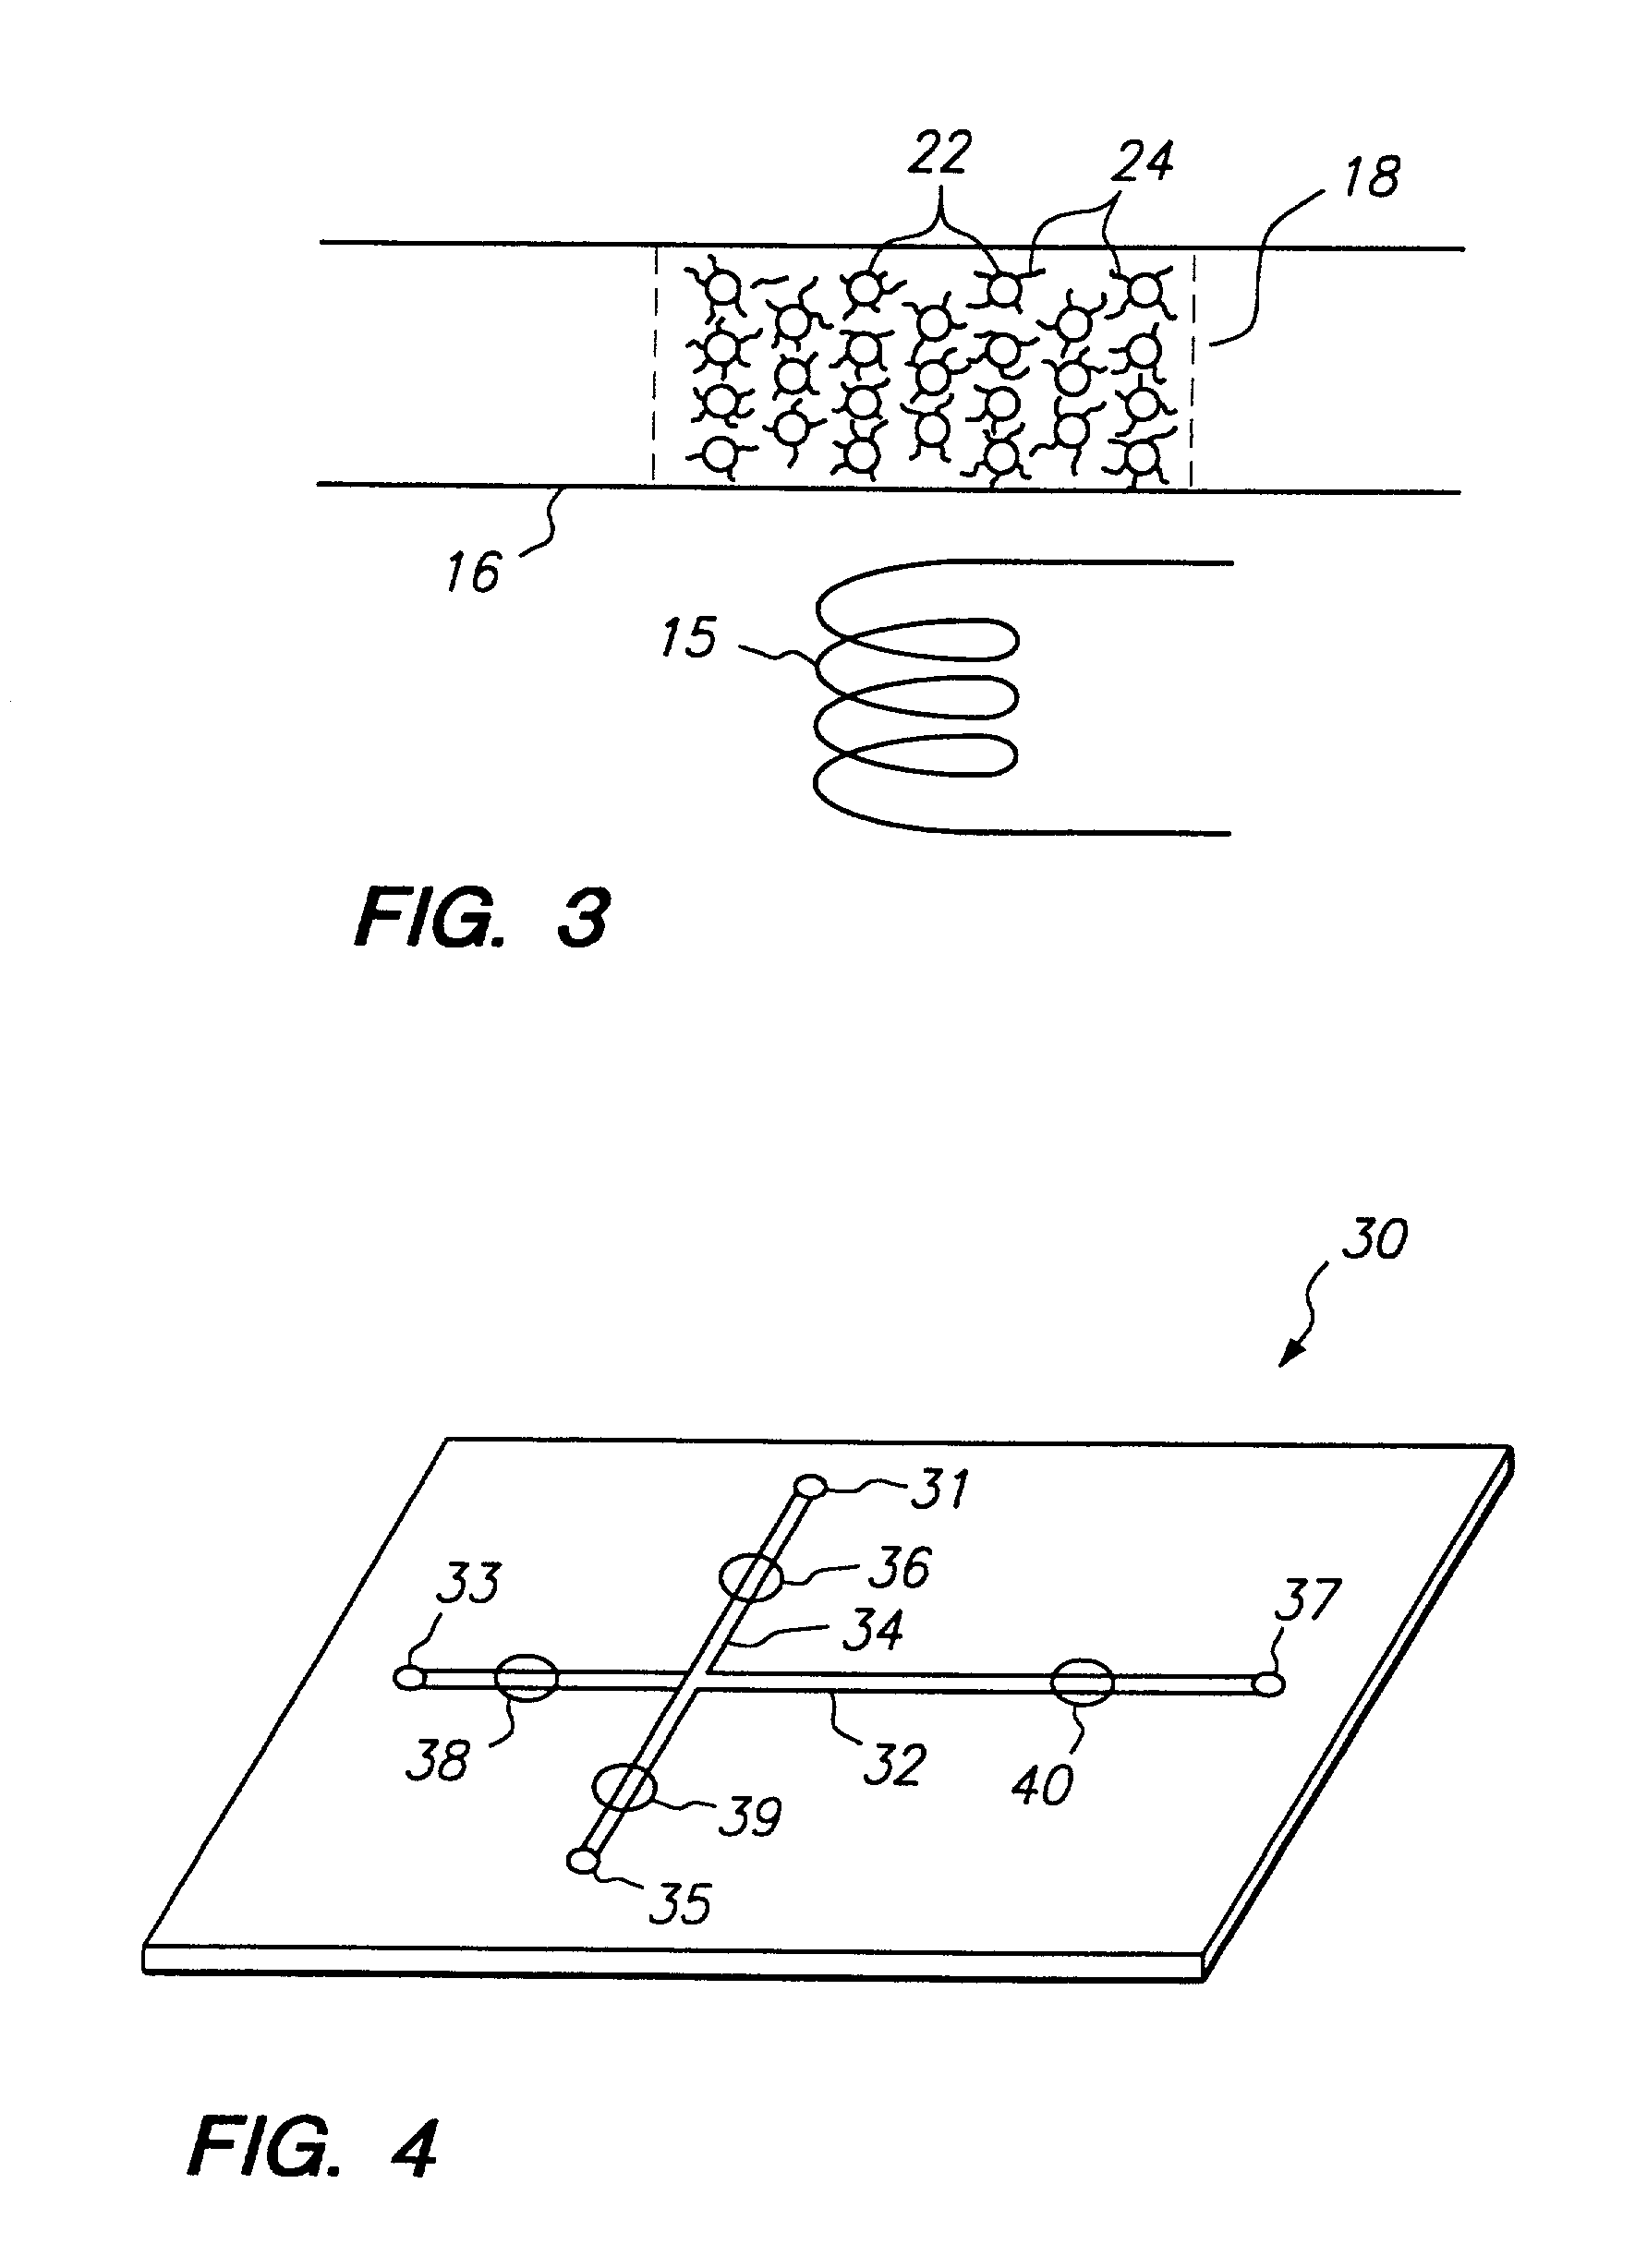 Chemico-mechanical microvalve and devices comprising the same